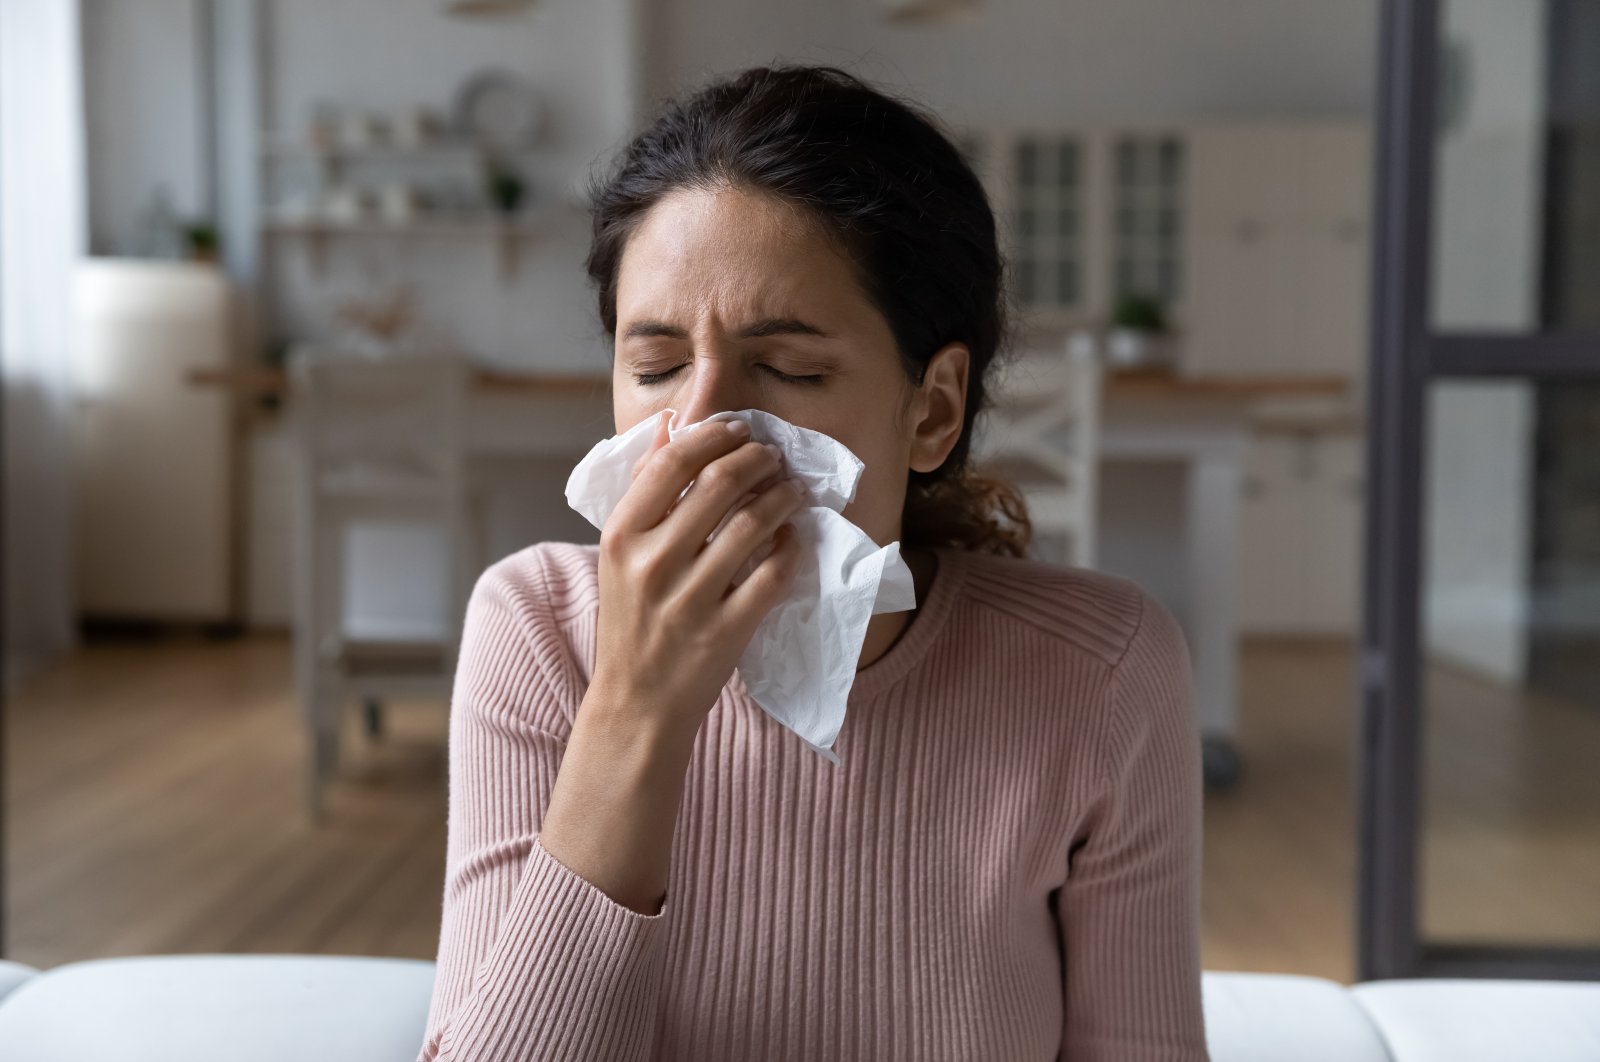 A triple epidemic, which is a combination of the coronavirus, flu and RSV, is on the rise across the world warns Turkish specialist. (Shutterstock Photo)